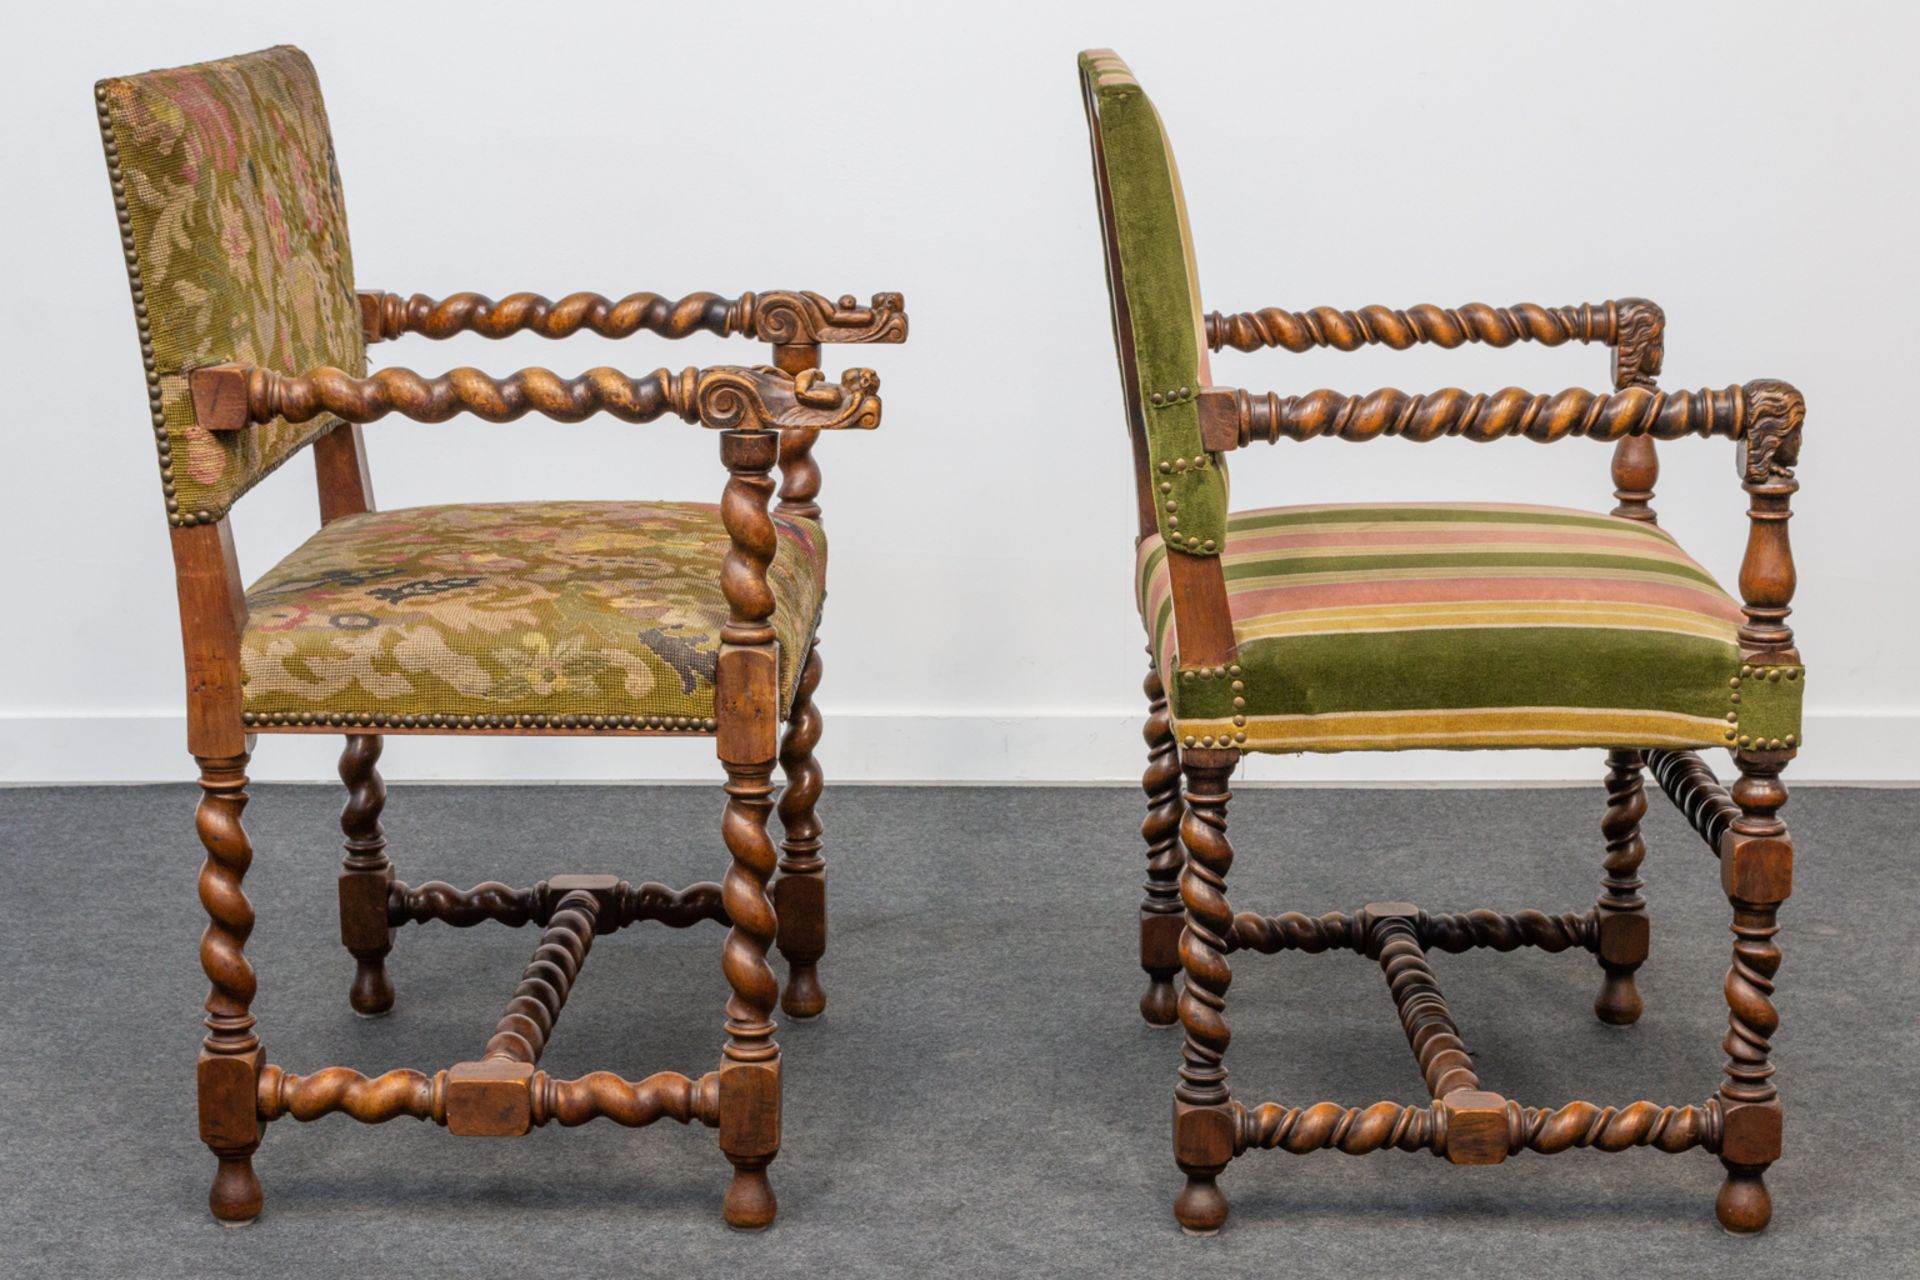 A collection of 2 castle chairs with sculptured handles. 19th century. (92 x 63 x 54 cm) - Bild 14 aus 18